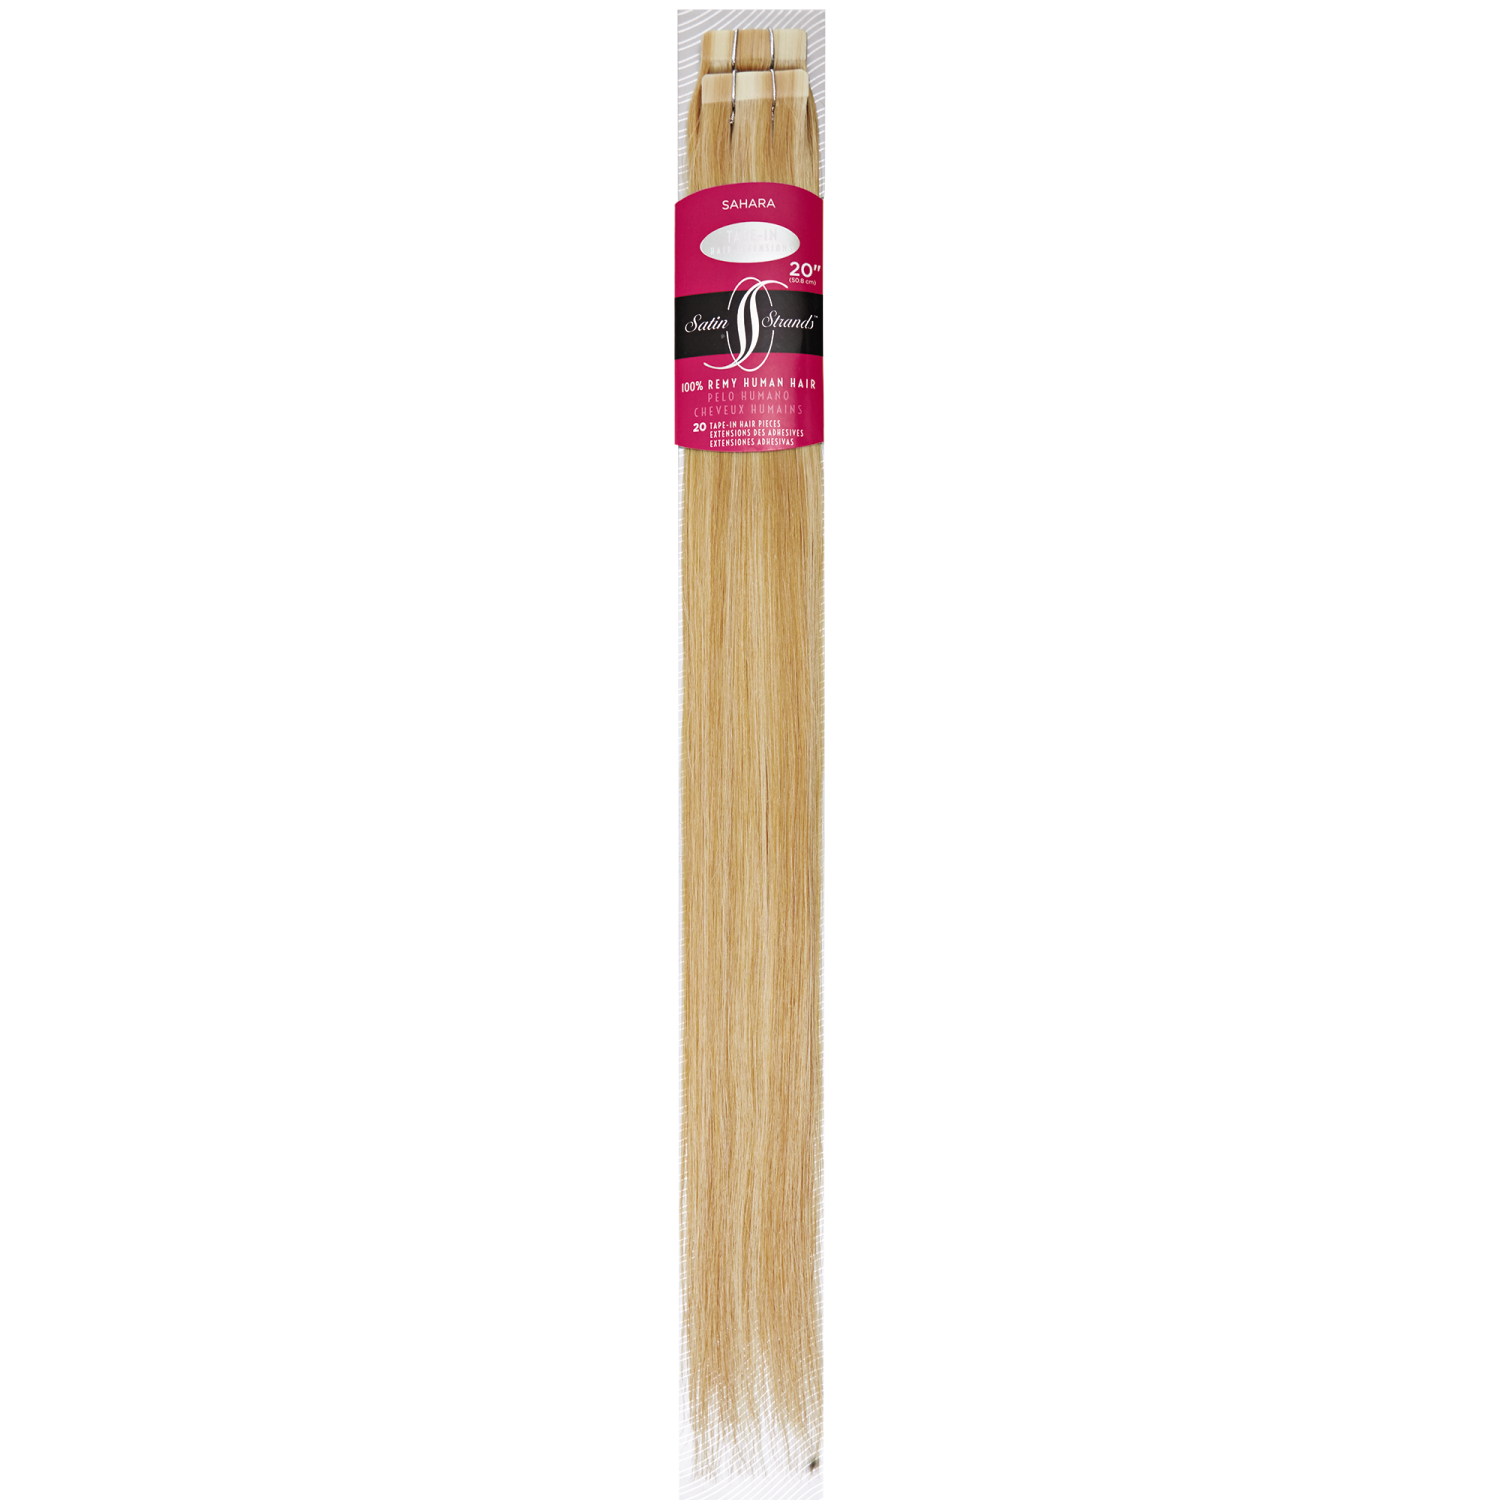 Satin Strands Tape In 20 Inch Human Hair Extensions, Weft Hair Extensions